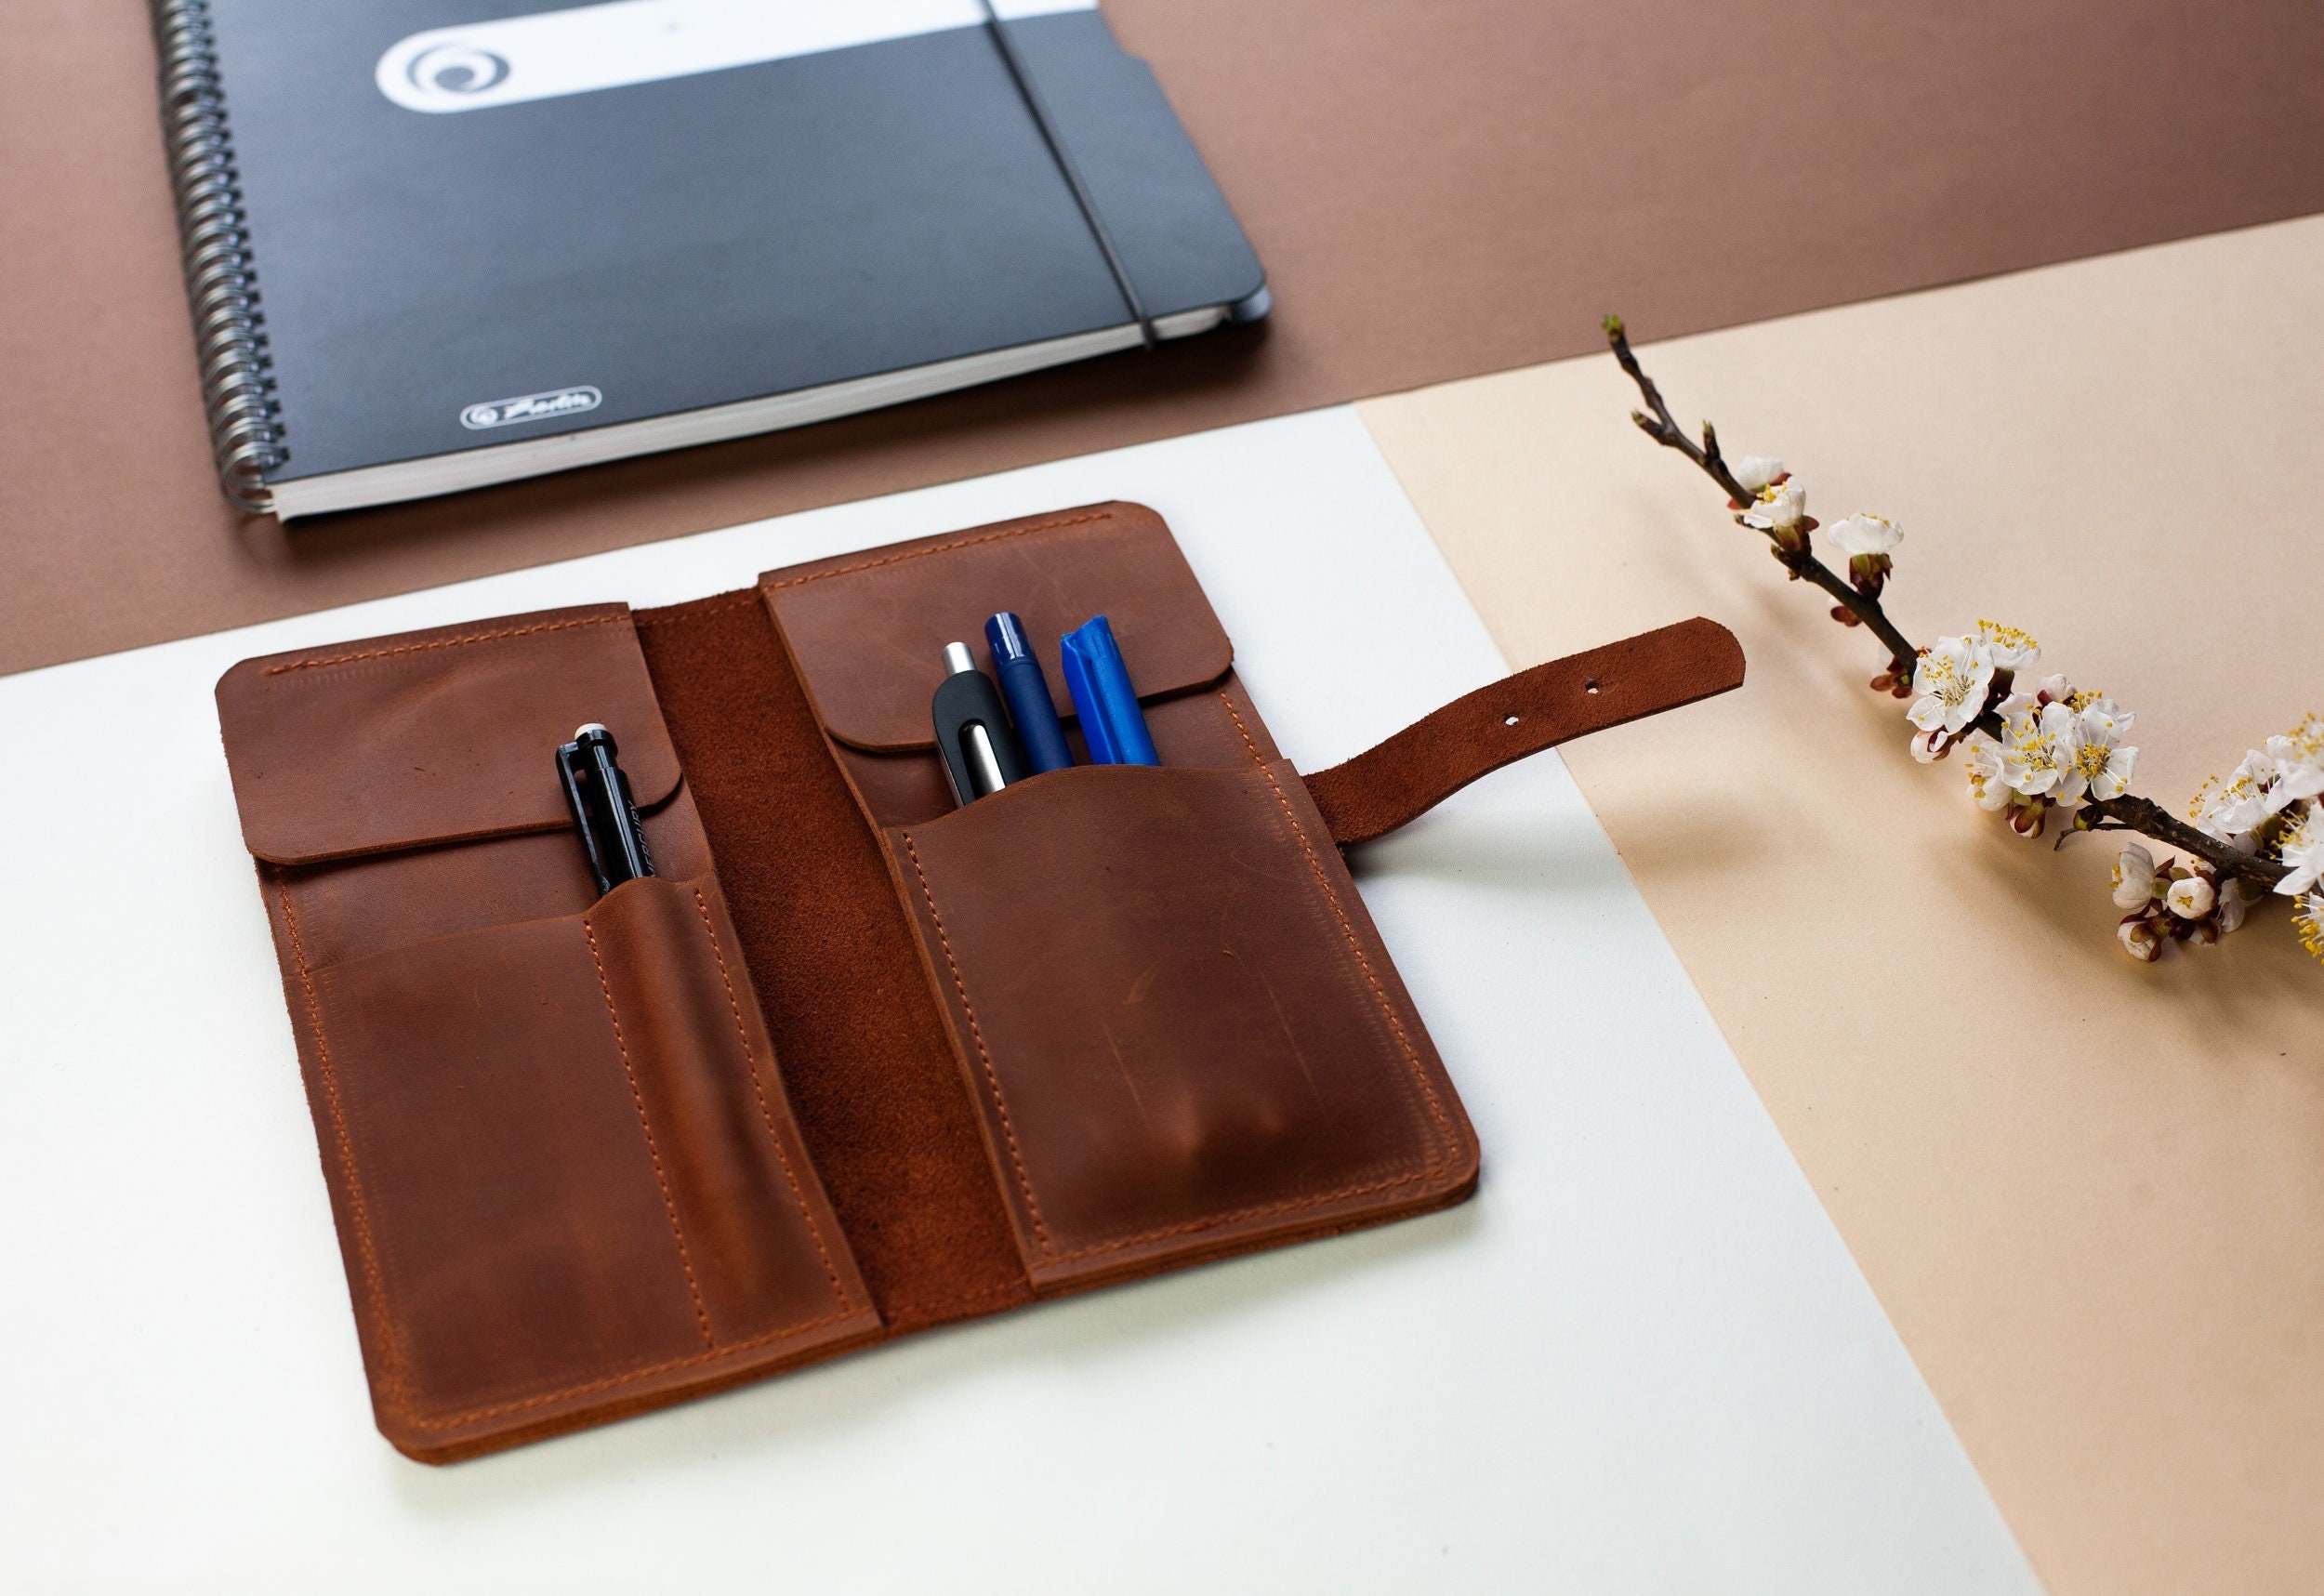 Leather Pen Case, Small Pencil Holder Pouch